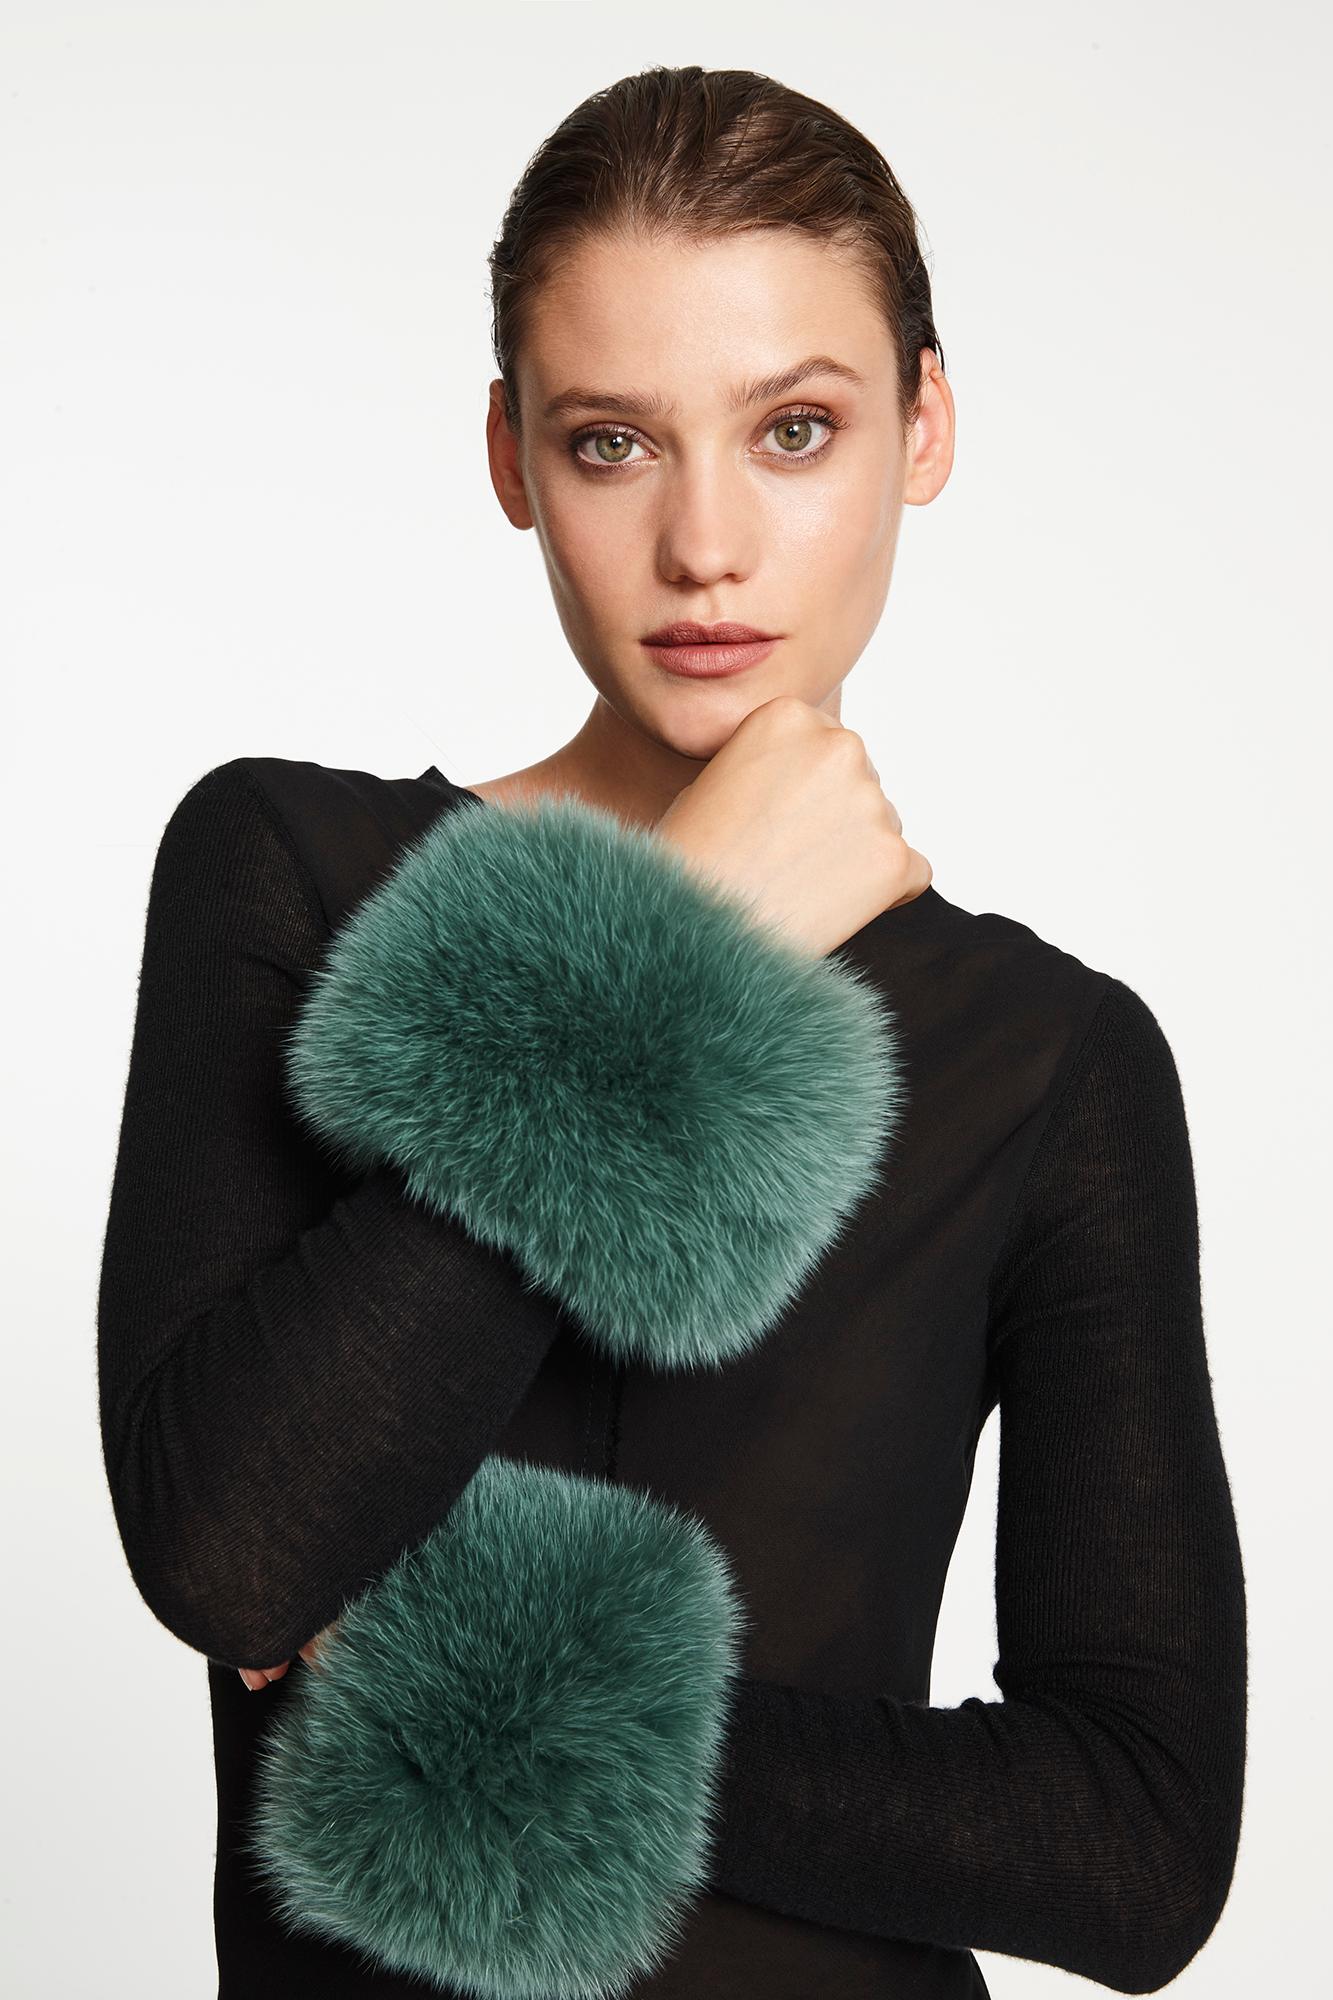 Verheyen London Snap on Fox Cuffs are the perfect accessory for winter/autumn dressing. Wear over any jumper or coat, these cuffs will jazz up any look and keep you staying cosy with style. 

Colour: Jade
Length: 28cm
Width: 10cm

Made in Italy

All